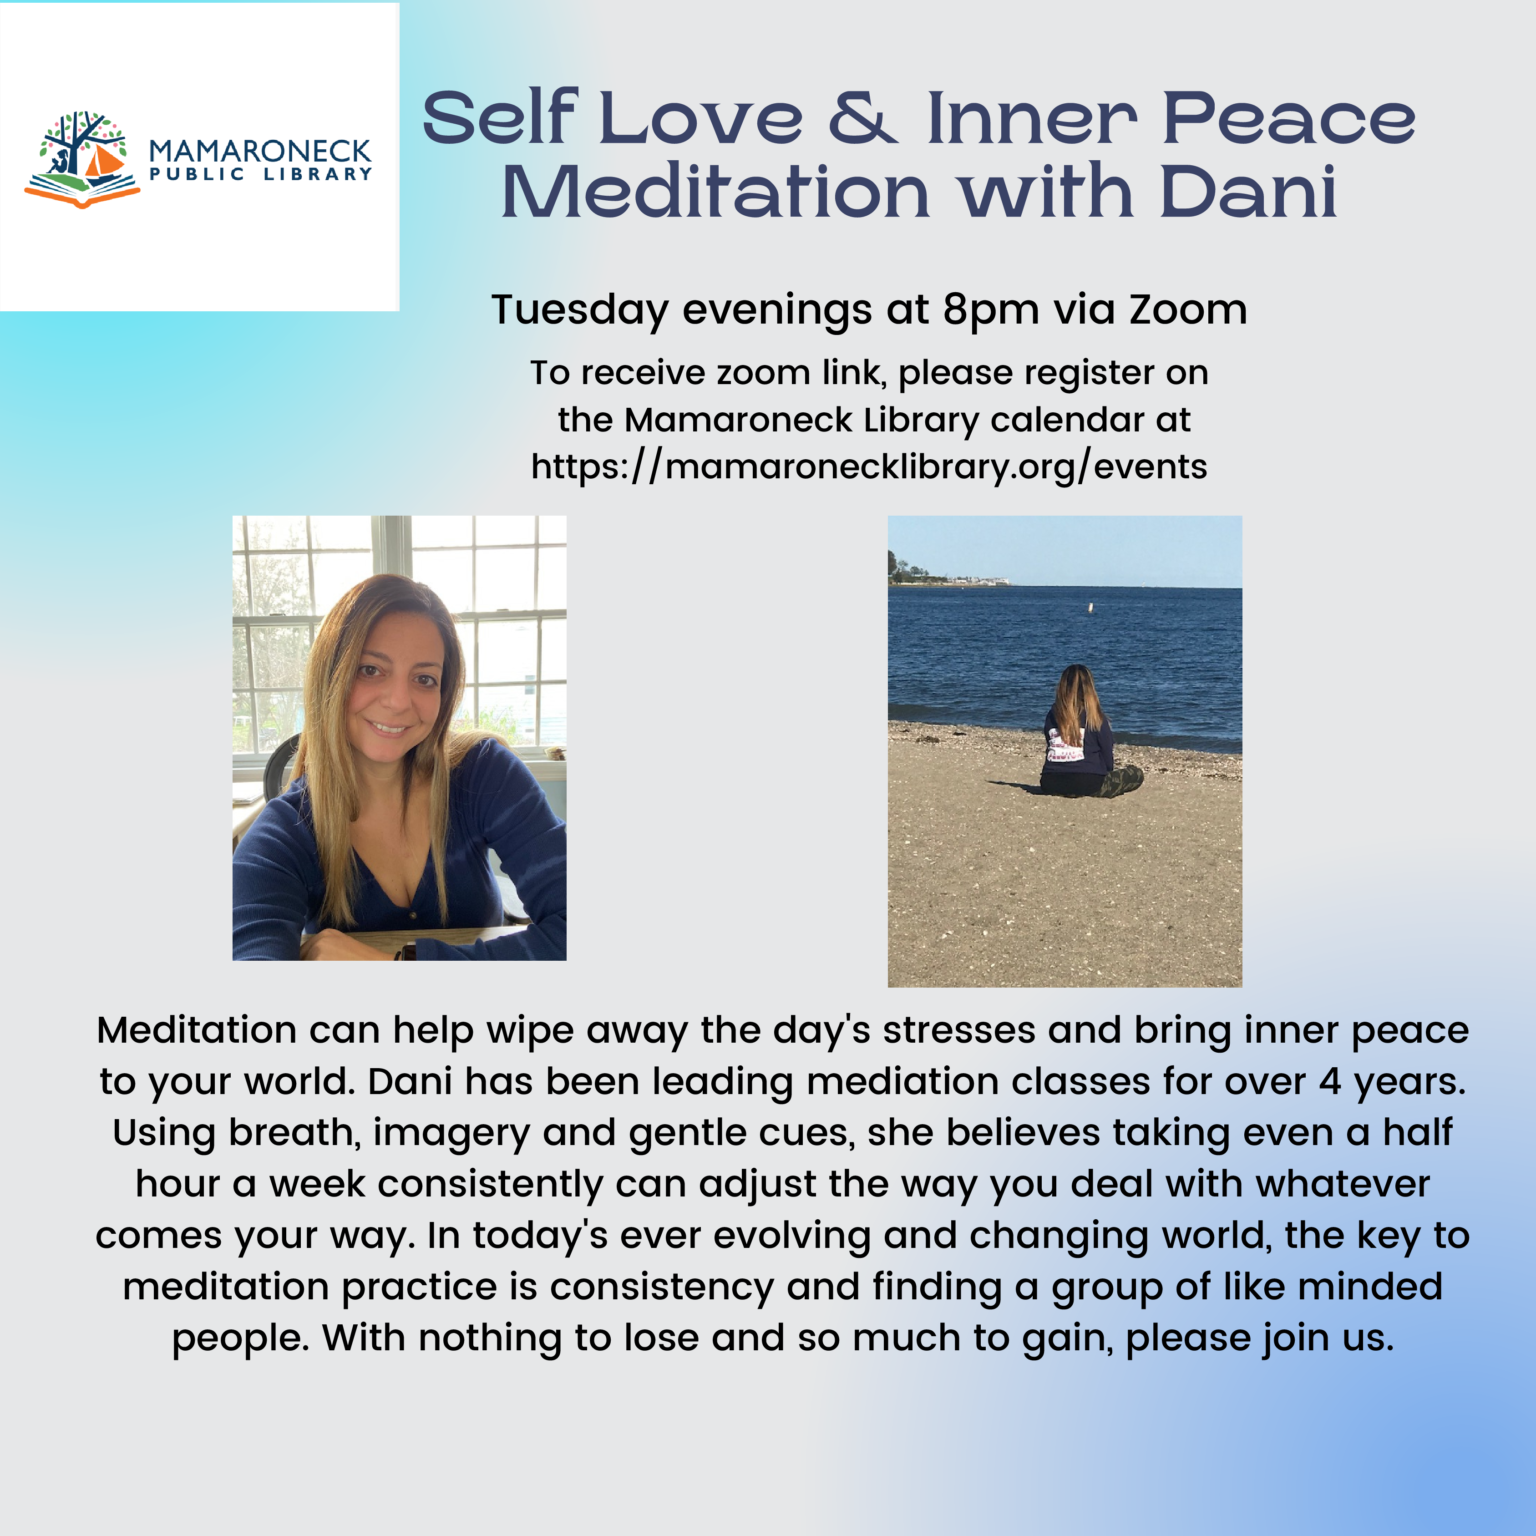 Inner Peace meditation with Dani Tuesday nights at 8pm